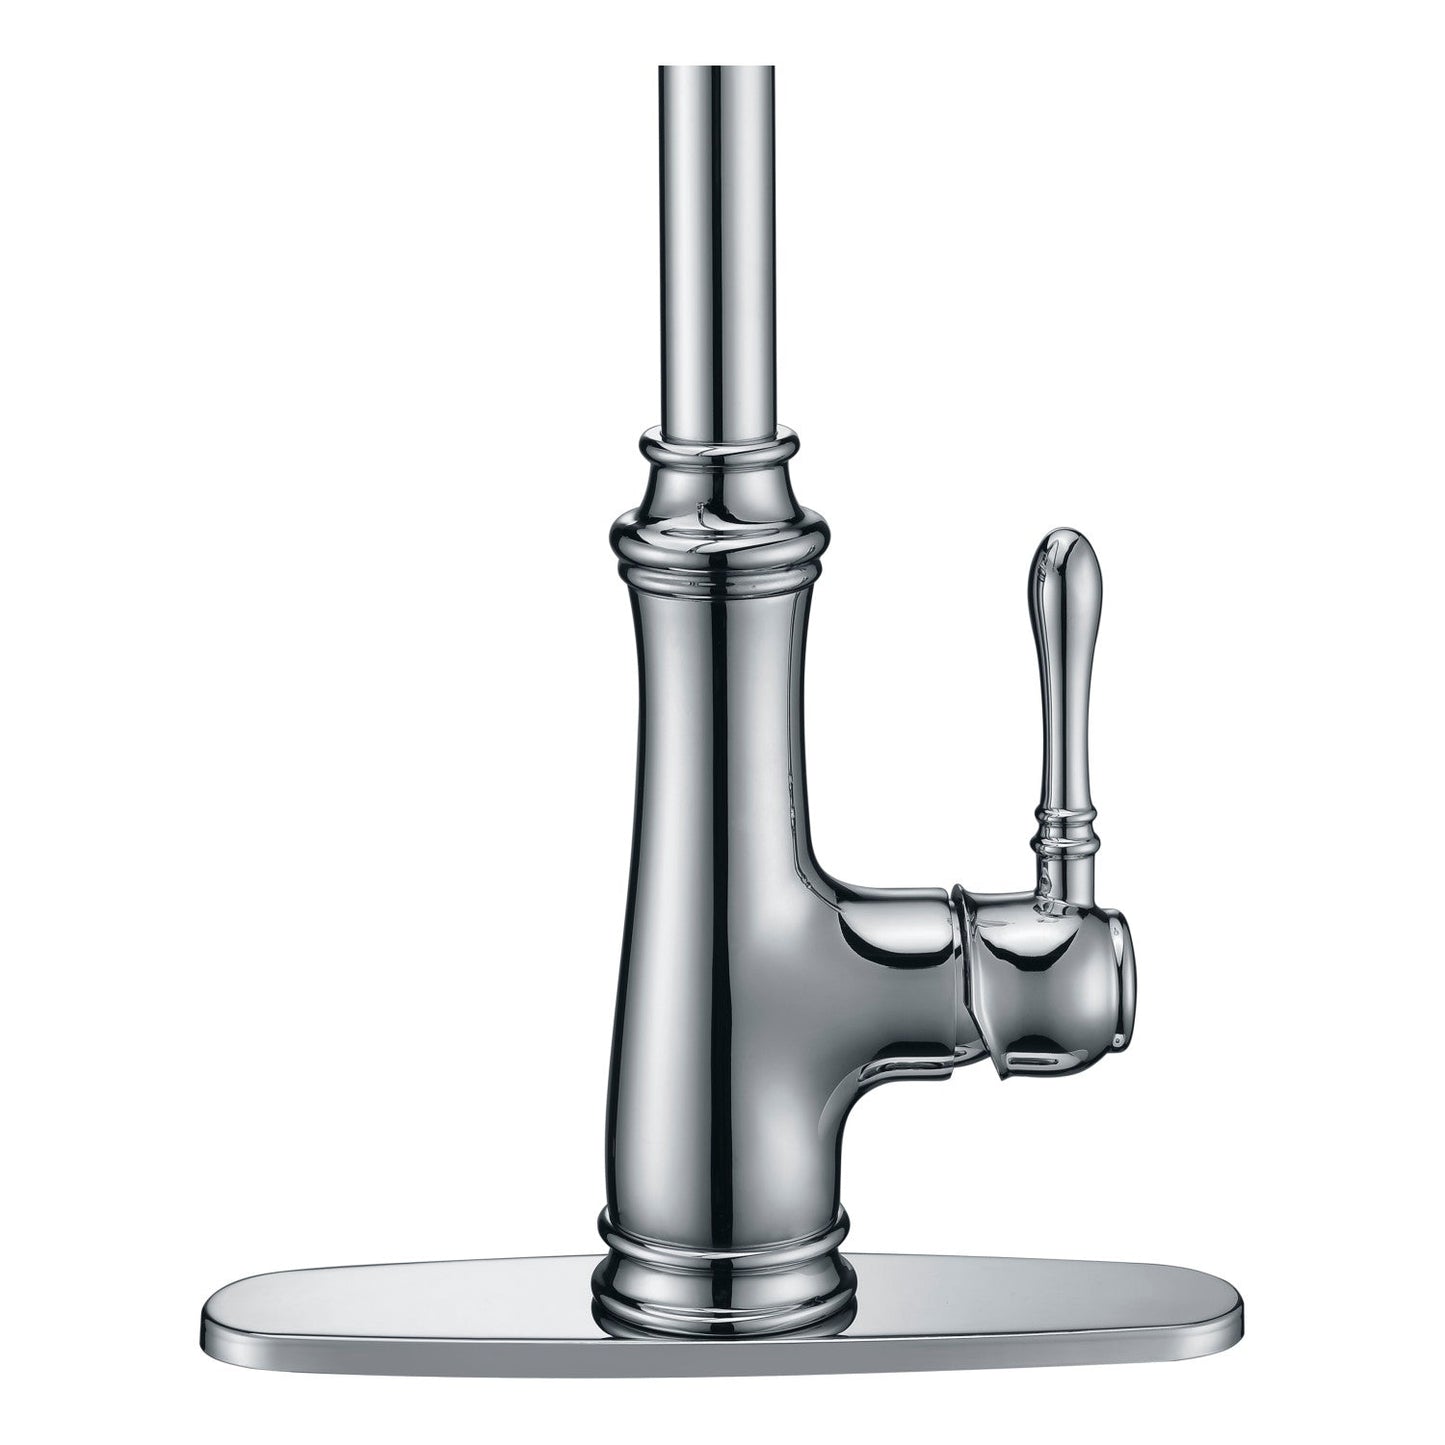 ANZZI Luna Series Single Hole Polished Chrome Kitchen Faucet With Euro-Grip Pull Down Sprayer